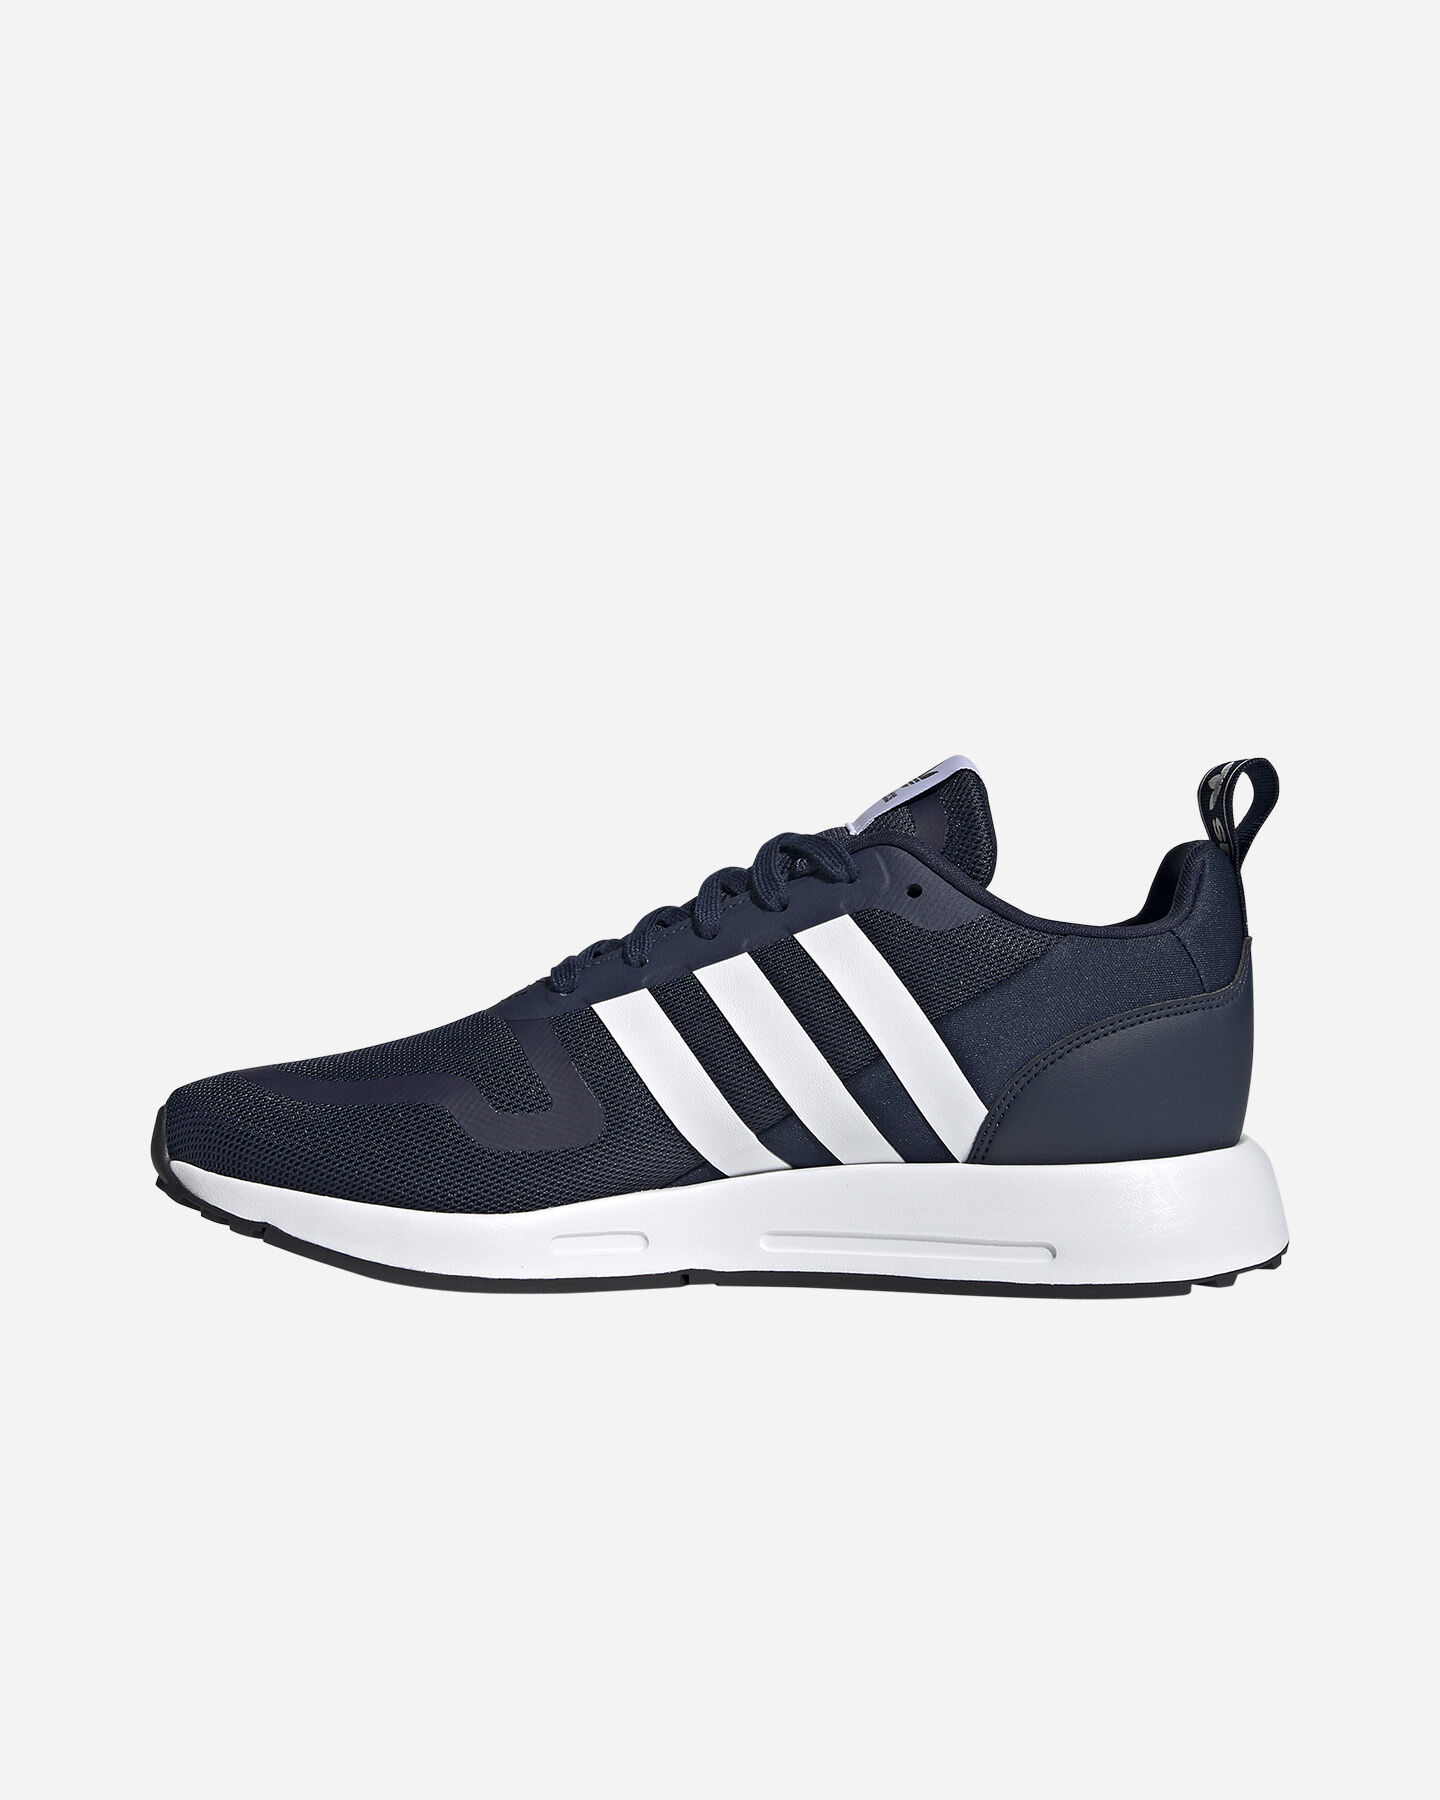  Scarpe sneakers ADIDAS SMOOTH RUNNER M S5285954|UNI|11 scatto 3